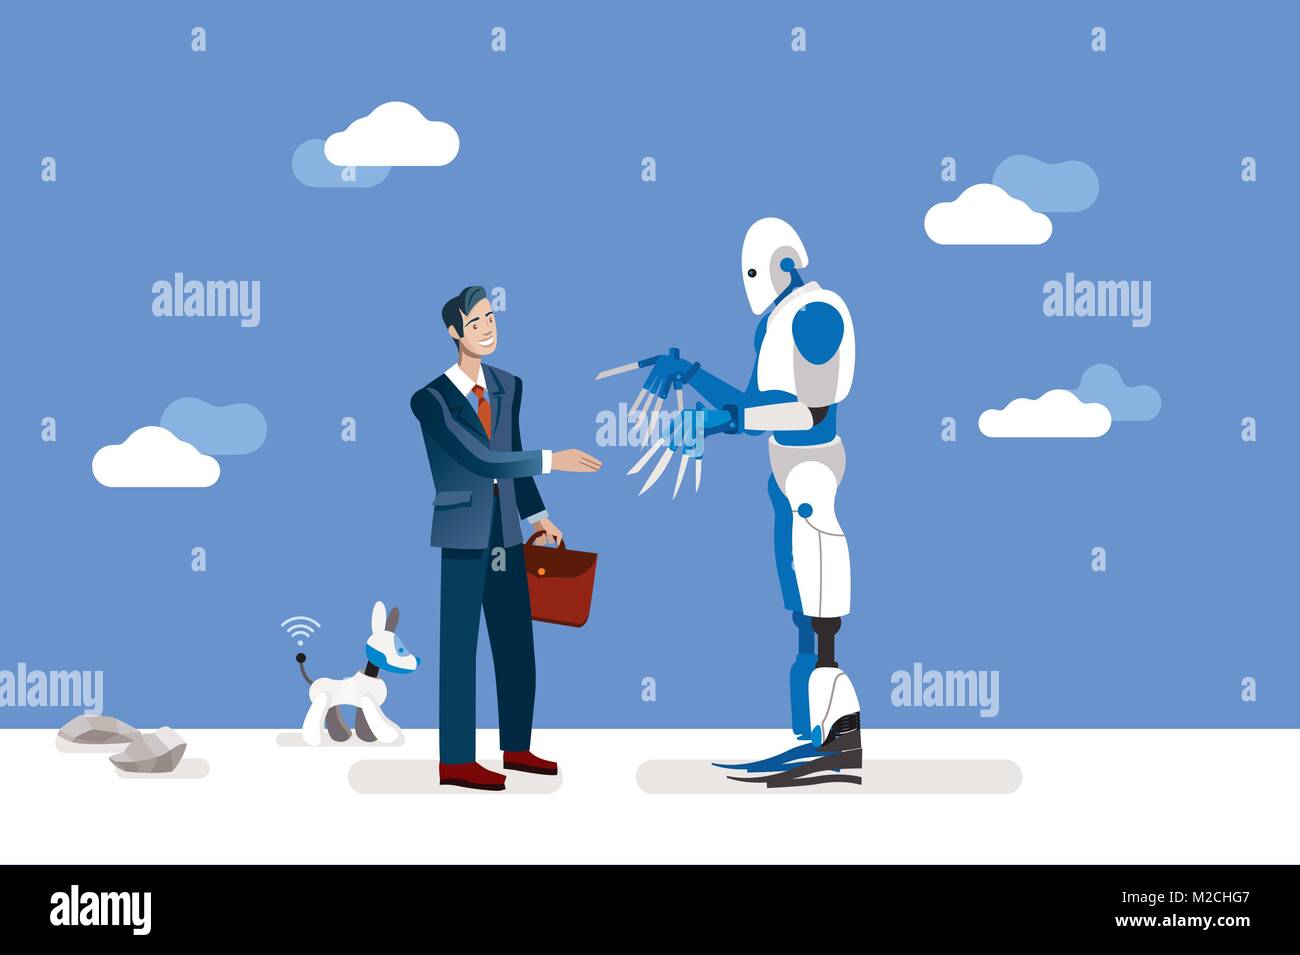 vector illustration about artificial intelligence and his risks.  A businessman offers his hand to a big and dangerous android robot. Stock Vector